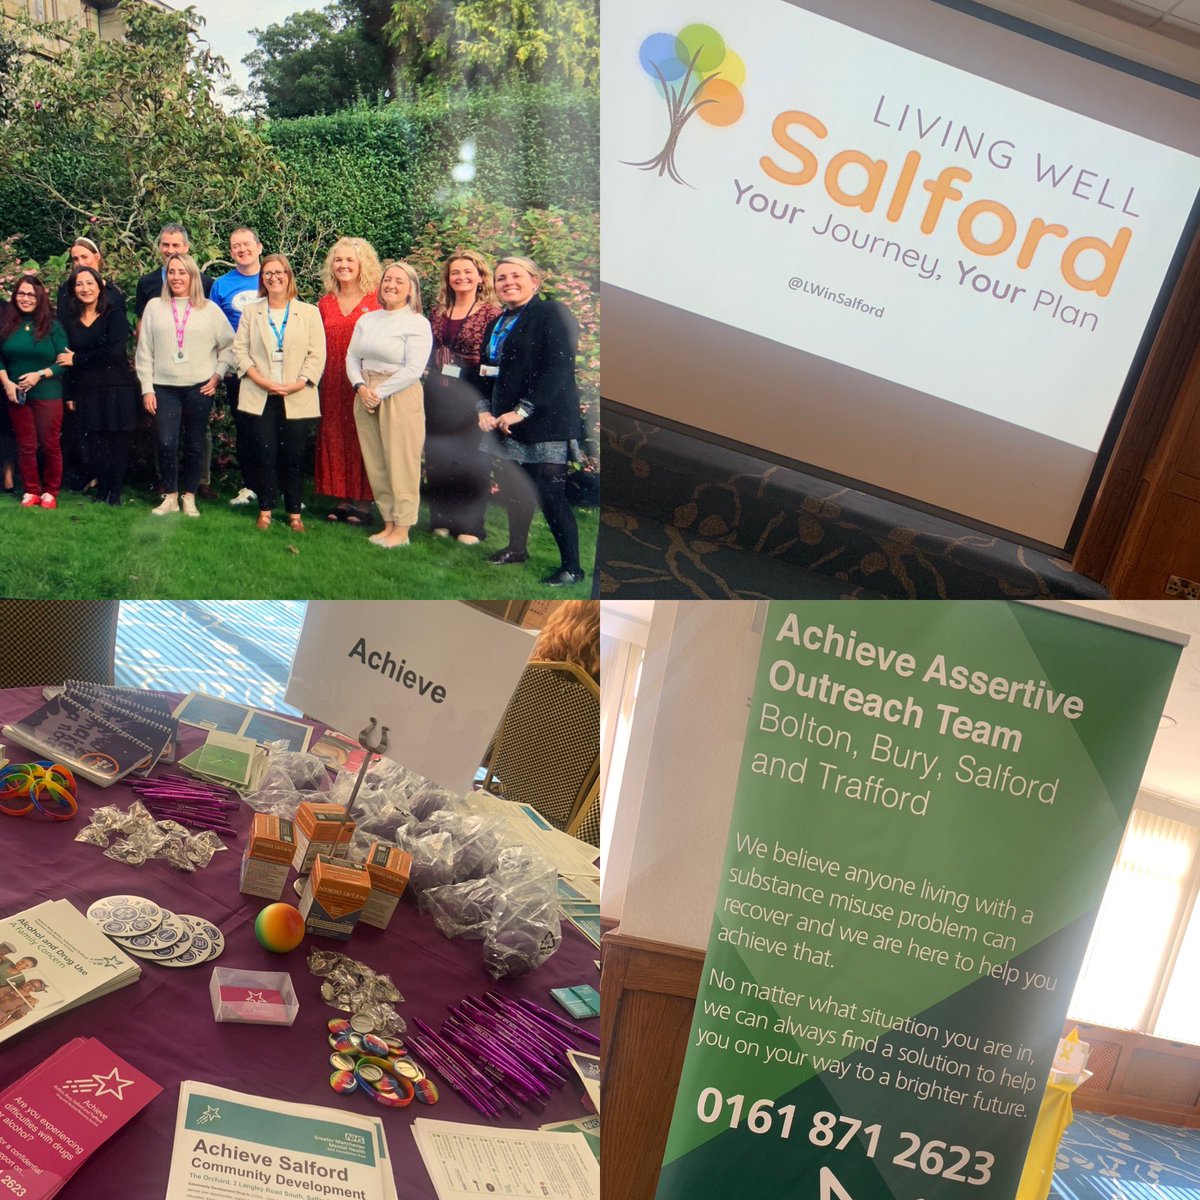 Individually we are one drop, together we are an ocean. Working in collaboration with shared goals and values. Change happens in partnership.  Inspiring and uplifting day, people and our communities at the heart of all we do.  @LWinSalford @TammyYoung111 @GMMH_NHS #WMHD2023